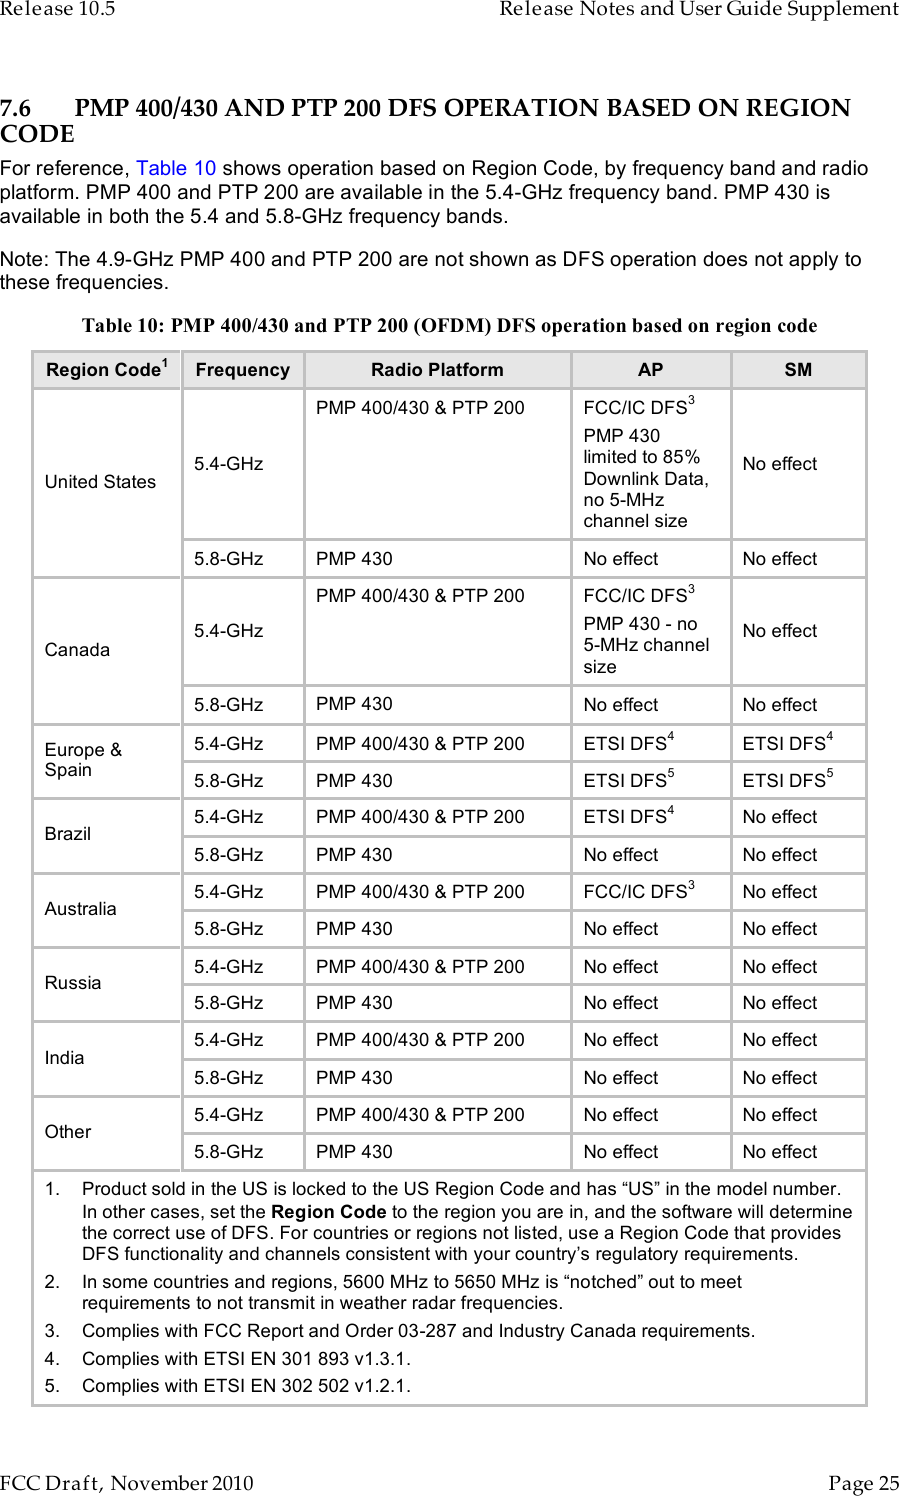 Release 10.5    Release Notes and User Guide Supplement      FCC Draft, November 2010  Page 25   7.6 PMP 400/430 AND PTP 200 DFS OPERATION BASED ON REGION CODE For reference, Table 10 shows operation based on Region Code, by frequency band and radio platform. PMP 400 and PTP 200 are available in the 5.4-GHz frequency band. PMP 430 is available in both the 5.4 and 5.8-GHz frequency bands. Note: The 4.9-GHz PMP 400 and PTP 200 are not shown as DFS operation does not apply to these frequencies. Table 10: PMP 400/430 and PTP 200 (OFDM) DFS operation based on region code Region Code1 Frequency Radio Platform AP SM 5.4-GHz PMP 400/430 &amp; PTP 200 FCC/IC DFS3 PMP 430 limited to 85% Downlink Data, no 5-MHz channel size No effect United States 5.8-GHz PMP 430 No effect No effect 5.4-GHz PMP 400/430 &amp; PTP 200 FCC/IC DFS3 PMP 430 - no 5-MHz channel size No effect Canada 5.8-GHz PMP 430 No effect No effect 5.4-GHz PMP 400/430 &amp; PTP 200 ETSI DFS4 ETSI DFS4 Europe &amp; Spain 5.8-GHz PMP 430 ETSI DFS5 ETSI DFS5 5.4-GHz PMP 400/430 &amp; PTP 200 ETSI DFS4 No effect Brazil 5.8-GHz PMP 430 No effect No effect 5.4-GHz PMP 400/430 &amp; PTP 200 FCC/IC DFS3 No effect Australia 5.8-GHz PMP 430 No effect No effect 5.4-GHz PMP 400/430 &amp; PTP 200 No effect No effect Russia 5.8-GHz PMP 430 No effect No effect 5.4-GHz PMP 400/430 &amp; PTP 200 No effect No effect India 5.8-GHz PMP 430 No effect No effect 5.4-GHz PMP 400/430 &amp; PTP 200 No effect No effect Other 5.8-GHz PMP 430 No effect No effect 1. Product sold in the US is locked to the US Region Code and has “US” in the model number. In other cases, set the Region Code to the region you are in, and the software will determine the correct use of DFS. For countries or regions not listed, use a Region Code that provides DFS functionality and channels consistent with your country’s regulatory requirements. 2. In some countries and regions, 5600 MHz to 5650 MHz is “notched” out to meet requirements to not transmit in weather radar frequencies. 3. Complies with FCC Report and Order 03-287 and Industry Canada requirements. 4. Complies with ETSI EN 301 893 v1.3.1. 5. Complies with ETSI EN 302 502 v1.2.1. 